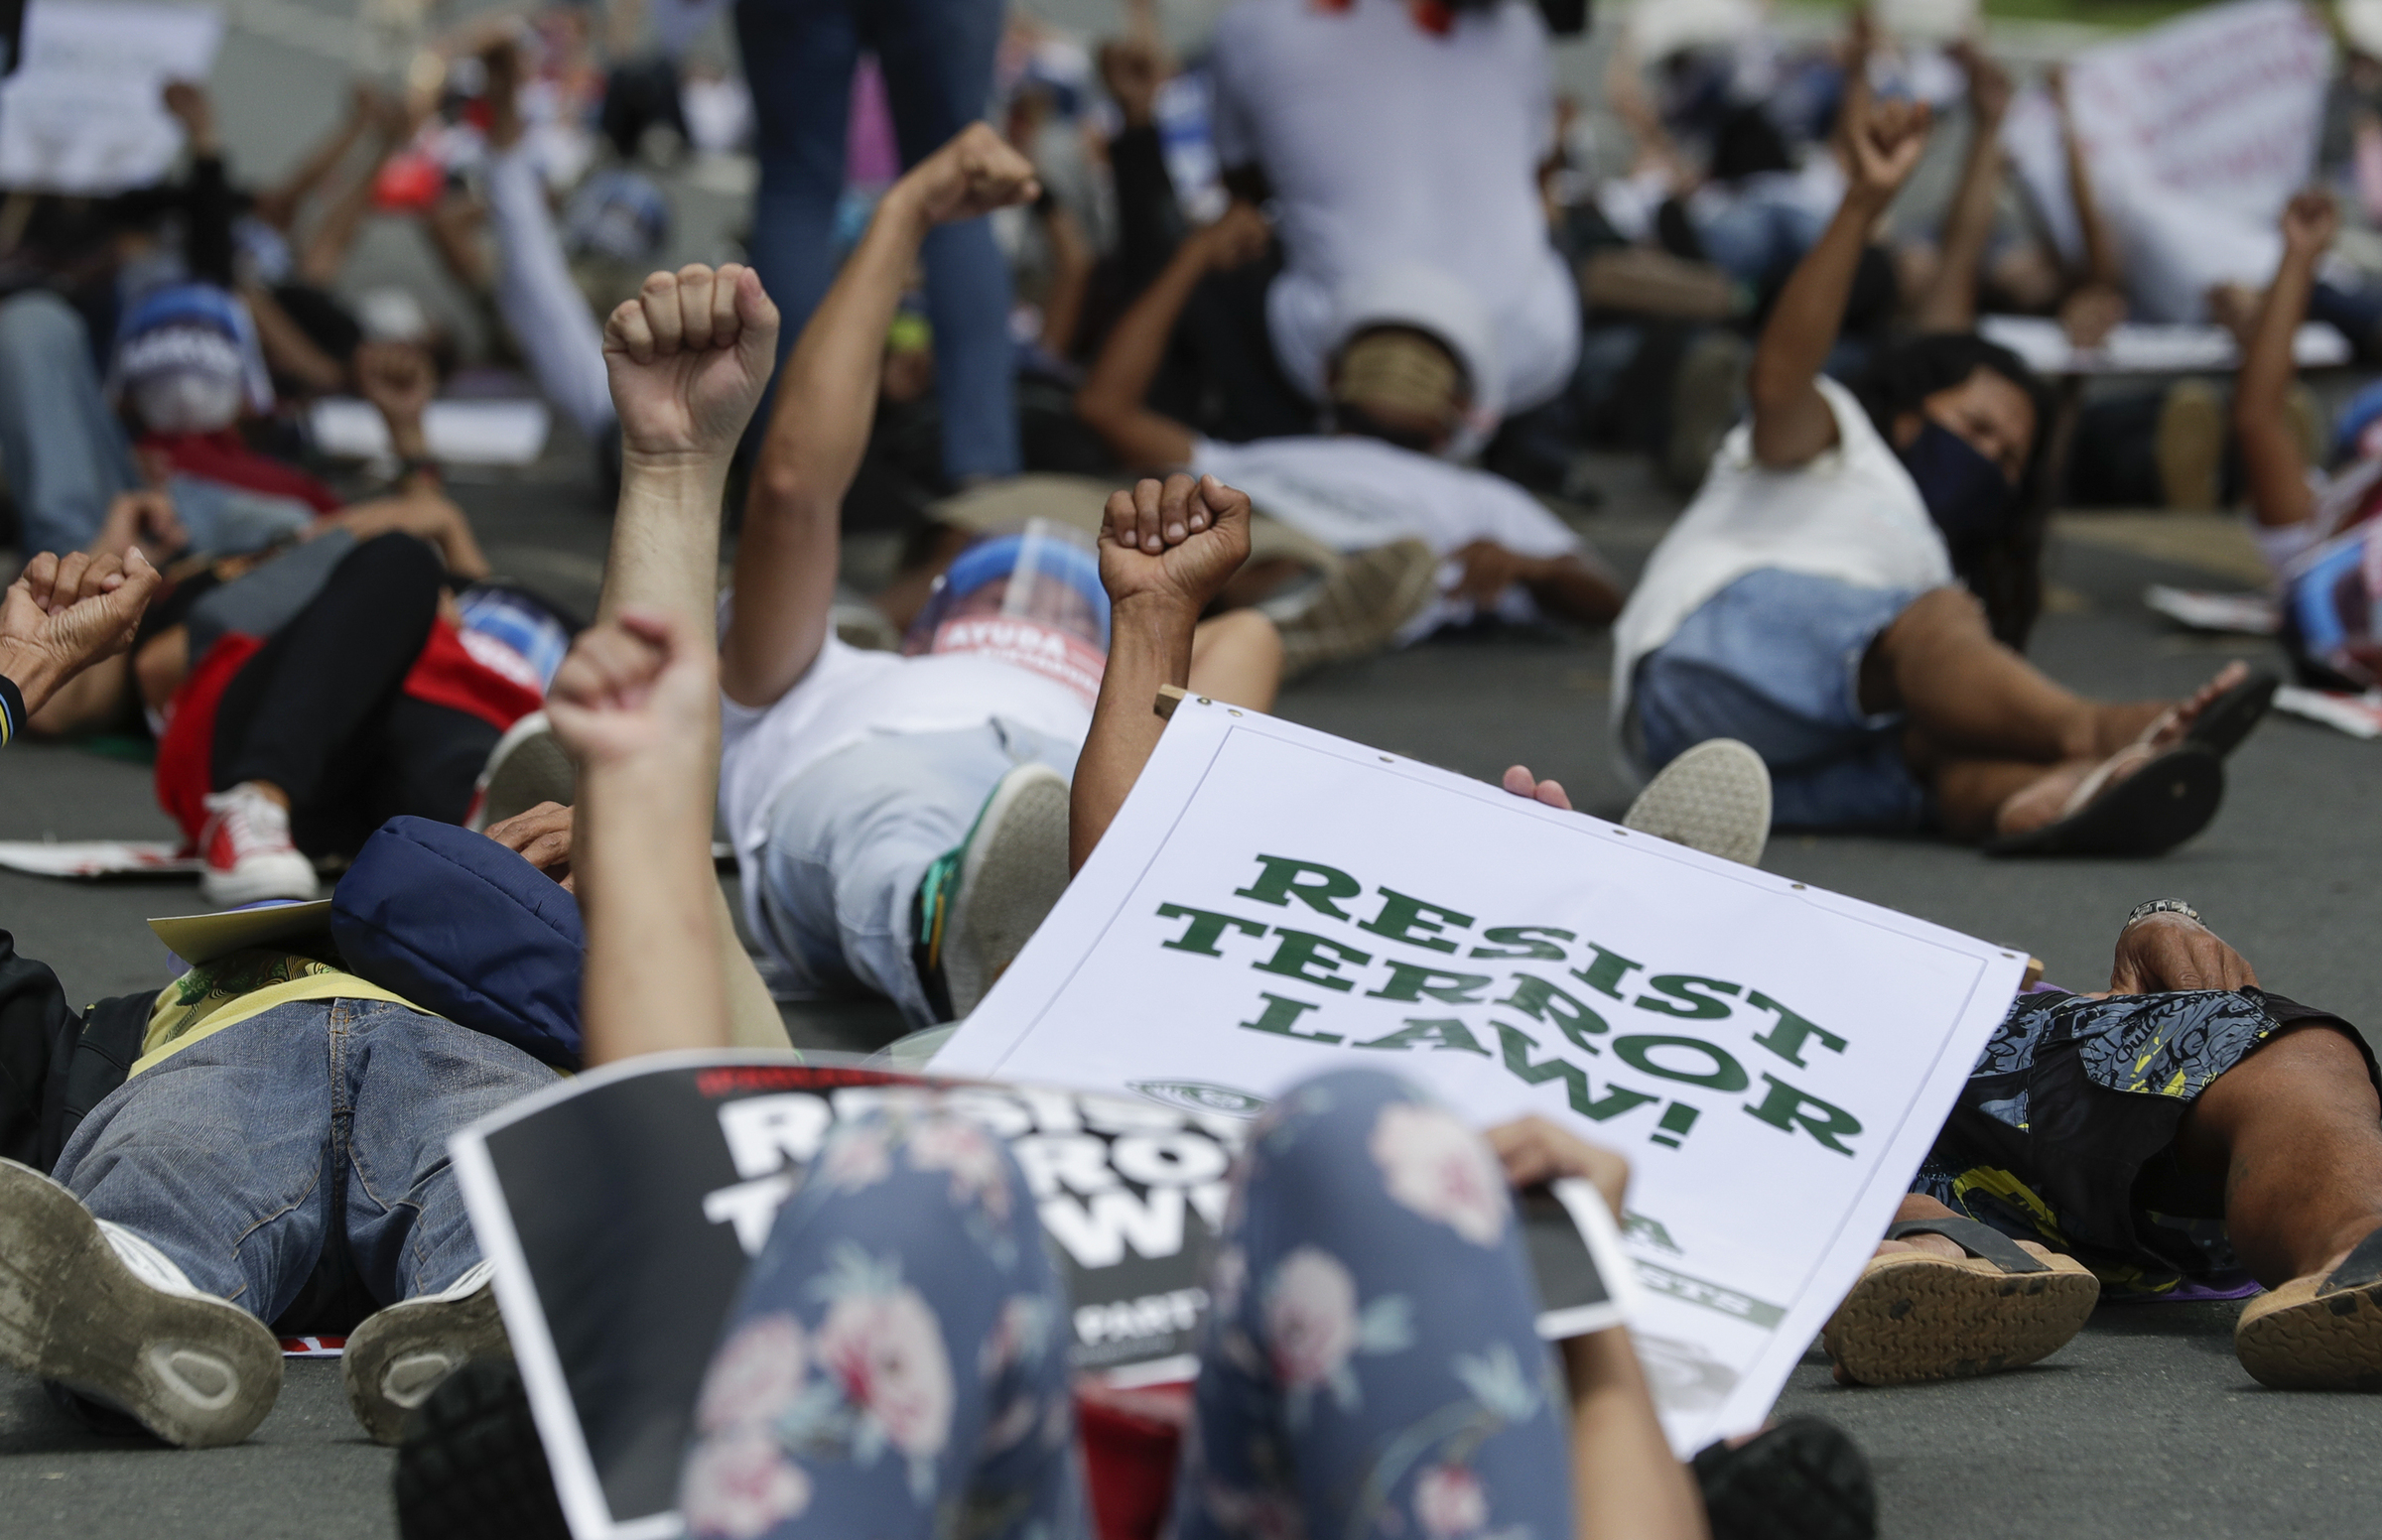 Protesters raise their clenched fists as they lay on the streets during a rally against the anti-terror law at the University of the Philippines in Manila, Philippines on Tuesday July 7, 2020. Philippine President Rodrigo Duterte recently signed a widely opposed anti-terror law which critics fear could be used against human rights defenders and to muzzle dissent. (AP Photo/Aaron Favila)